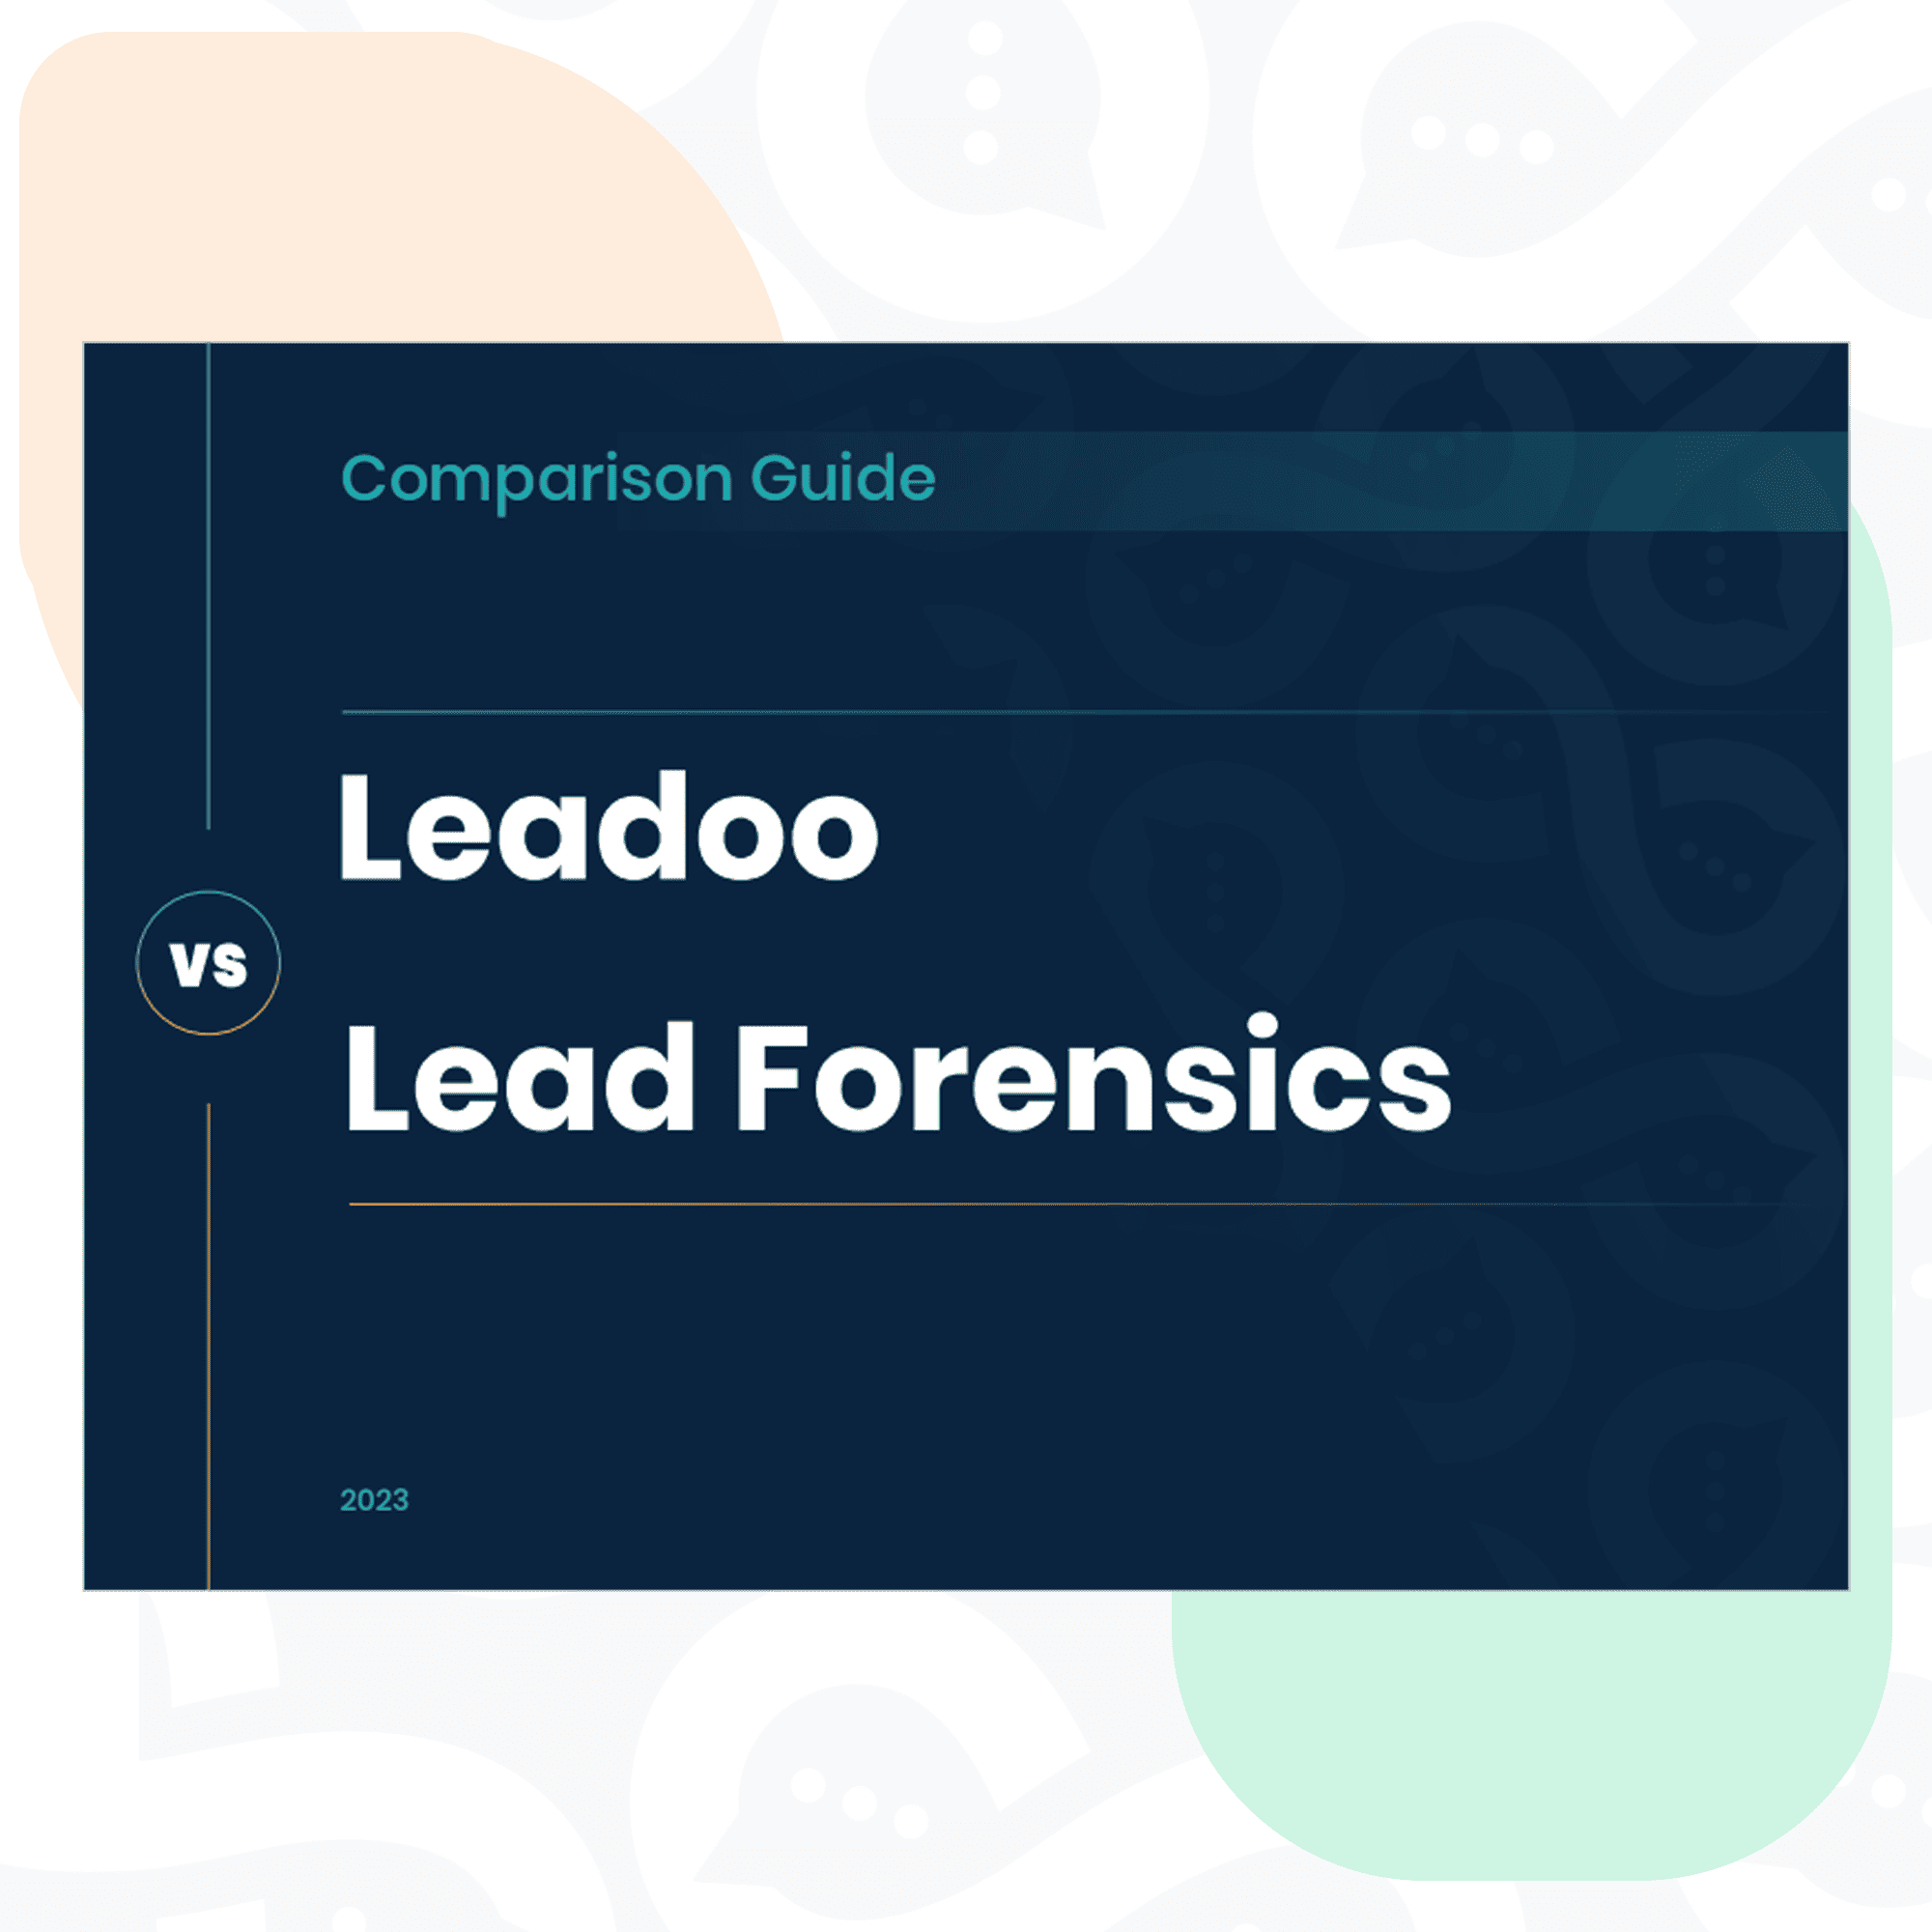 Leadoo vs Lead Forensics Front Page